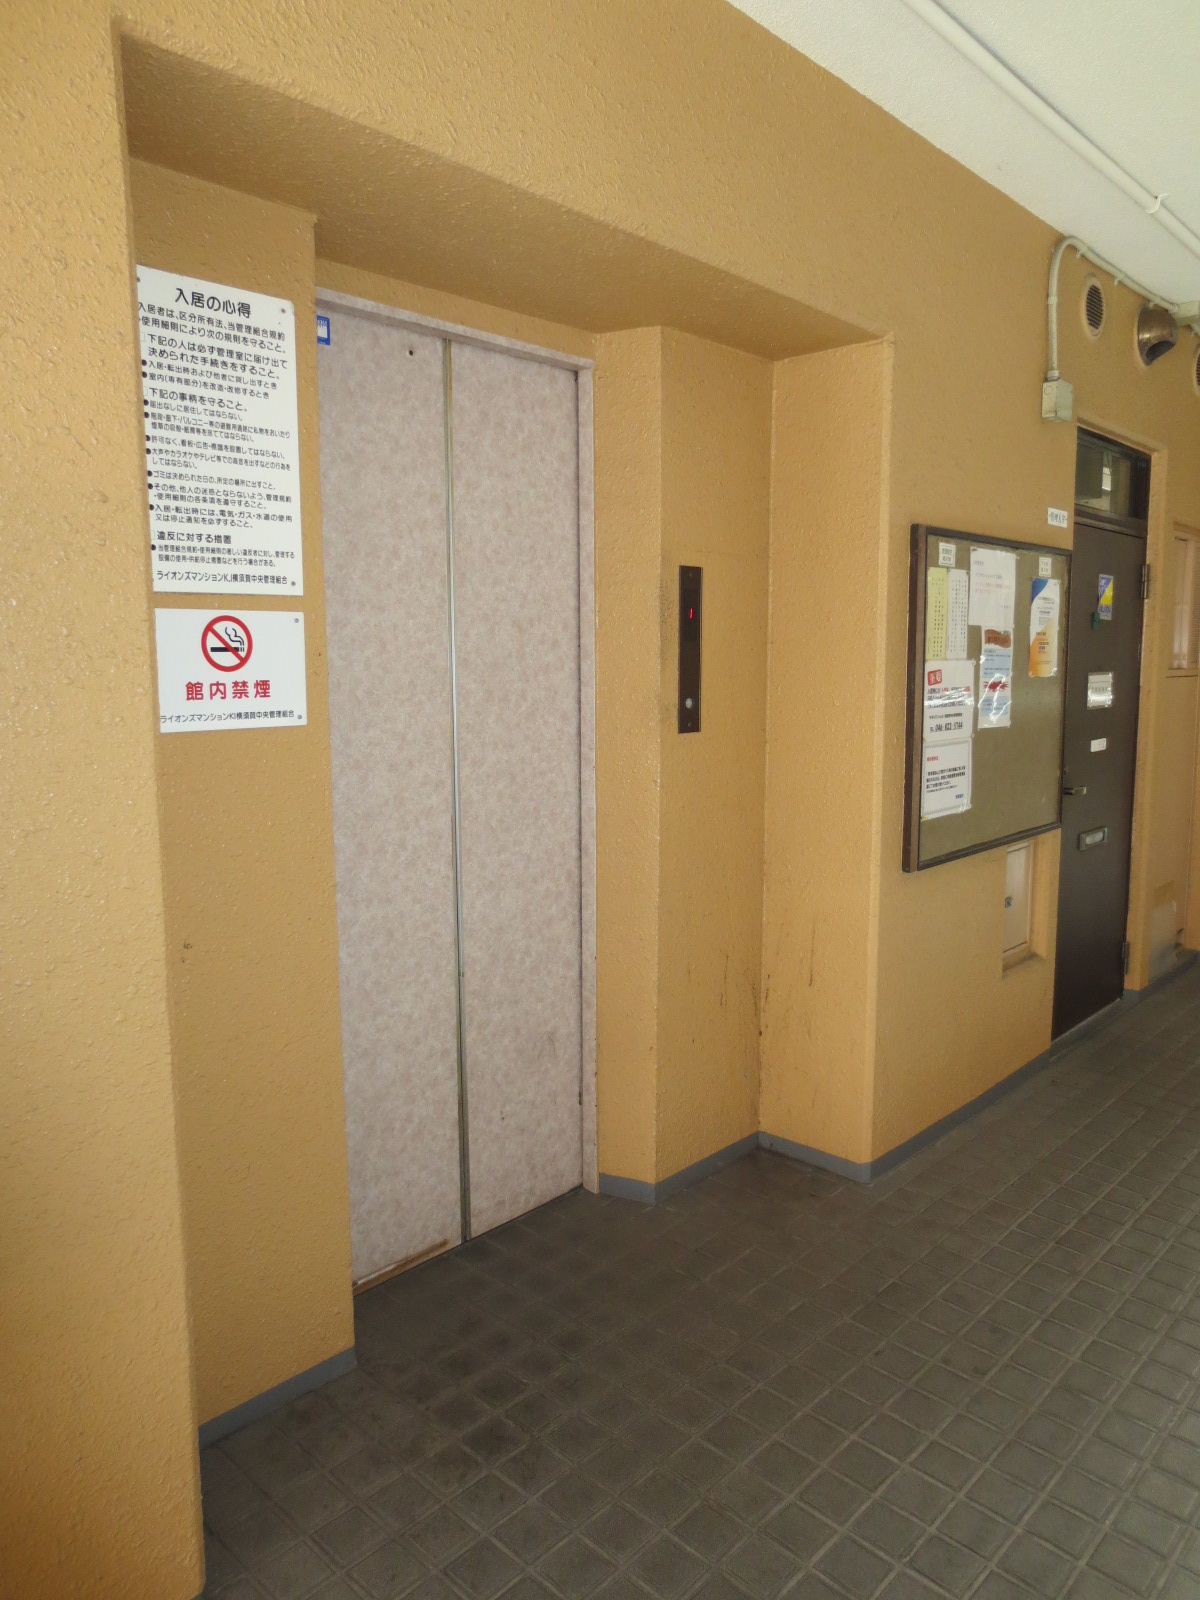 Other common areas. With elevator